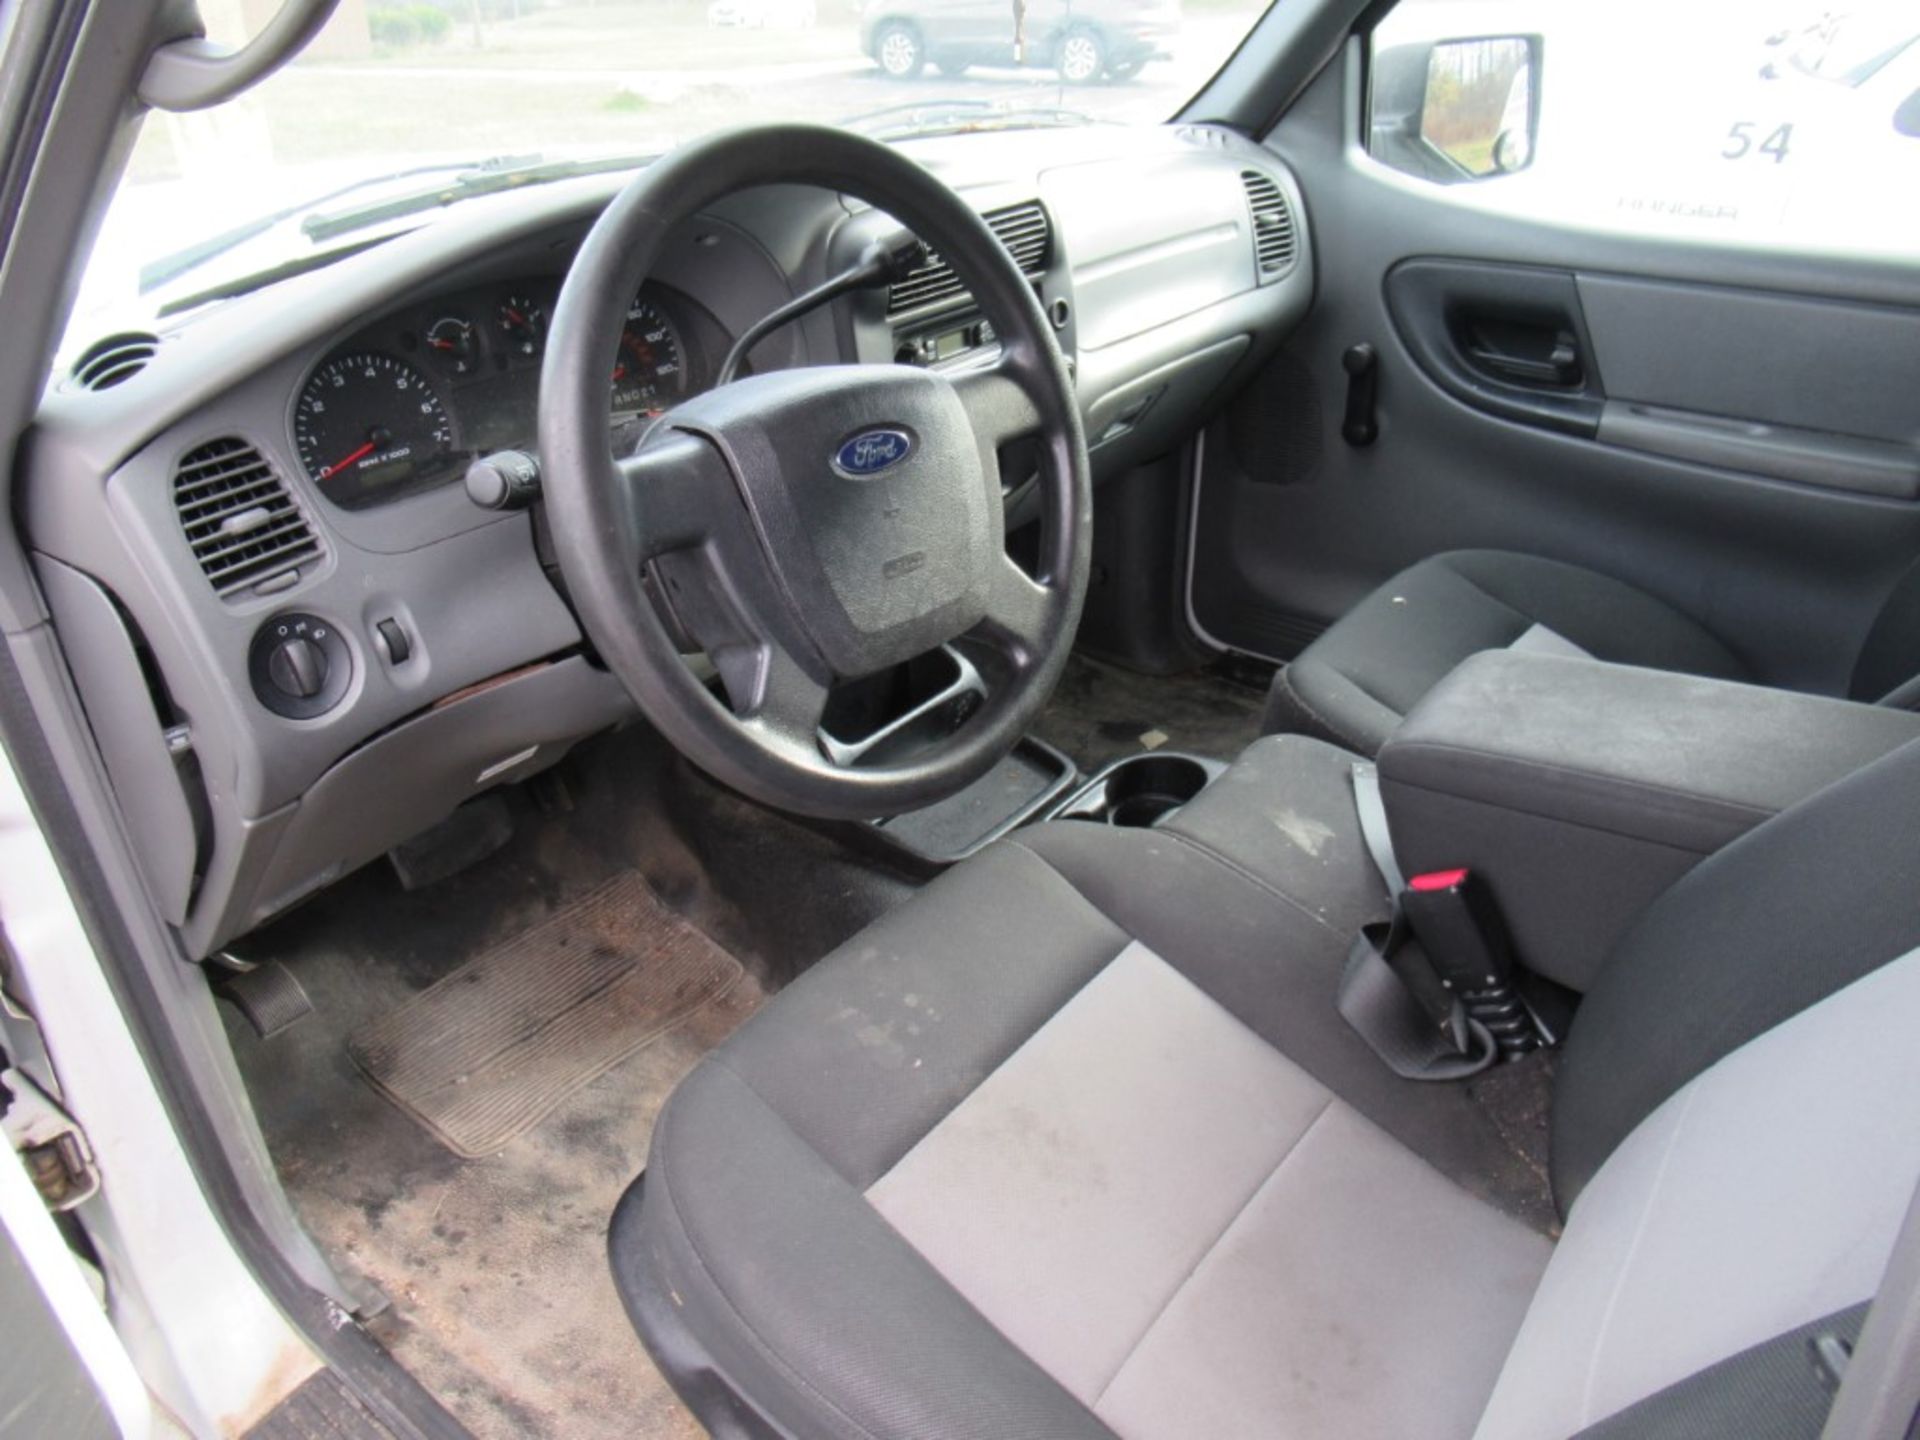 2009 Ford Ranger Pickup, VIN 1FTYR10D29PA65406, Regular Cab, Automatic, AC, AM/FM, Cap, Would Not - Image 19 of 23